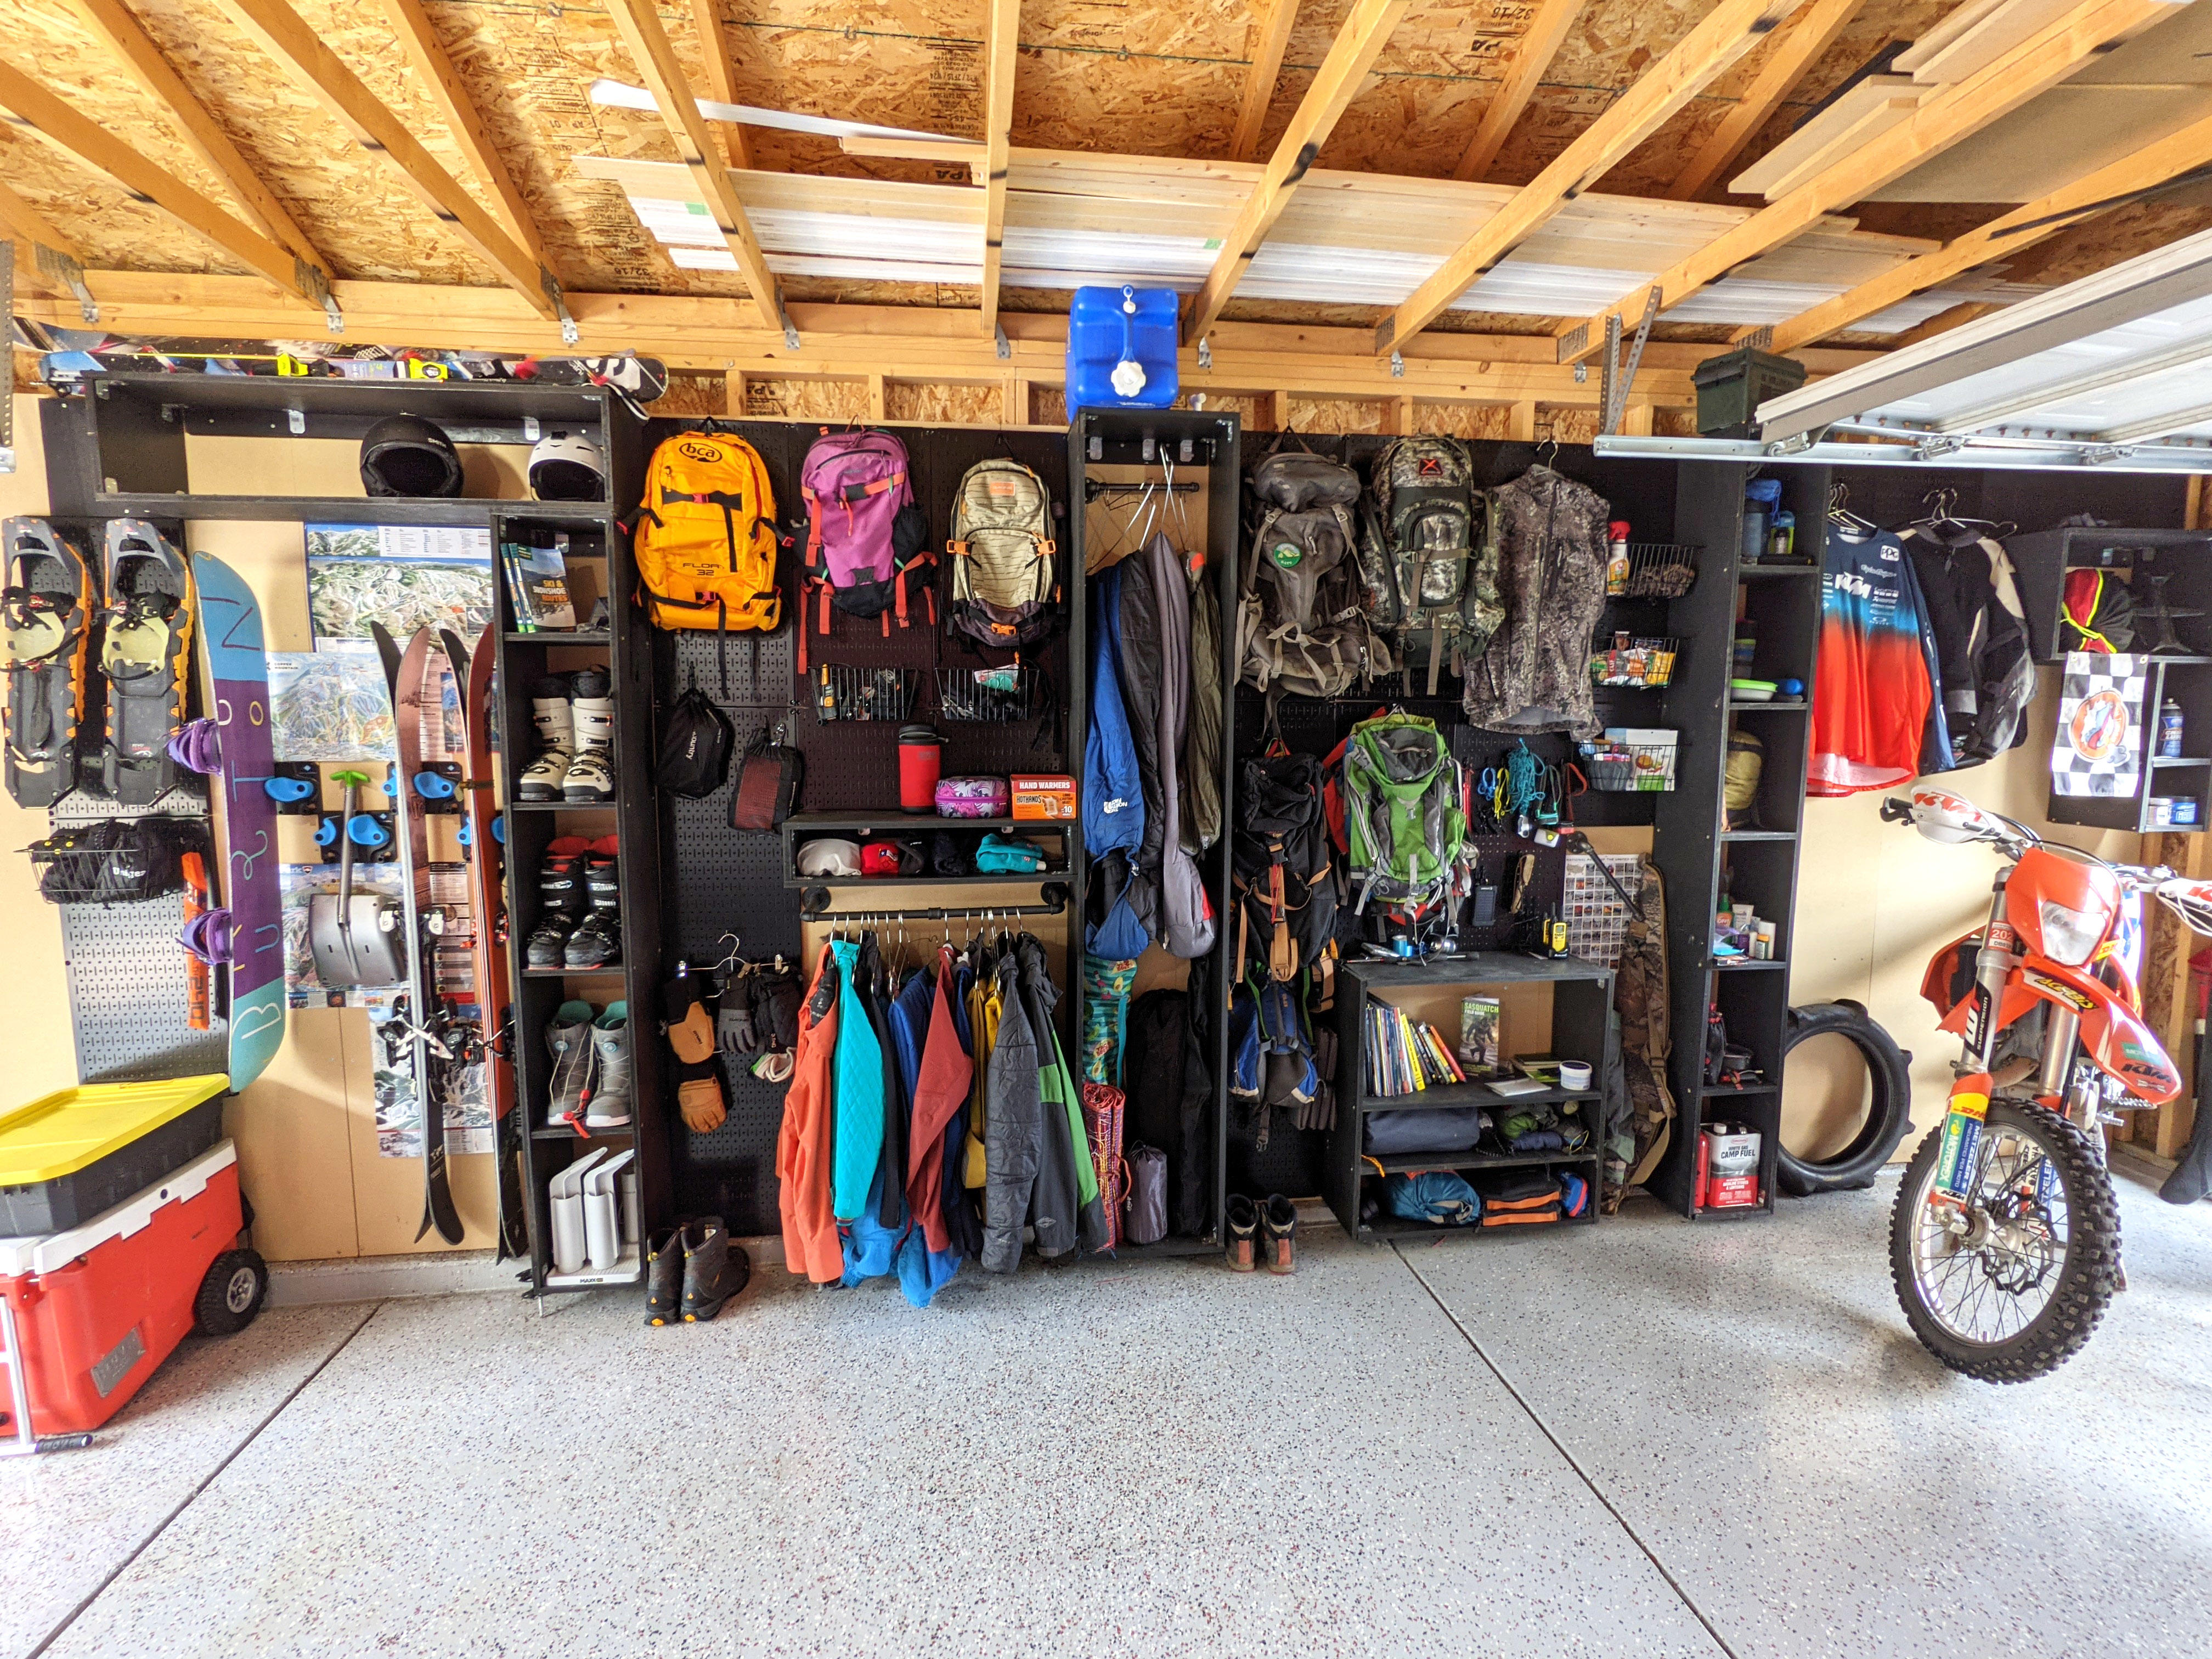 The Ultimate Adventure Set Up Wins! - Wall Control Pegboard